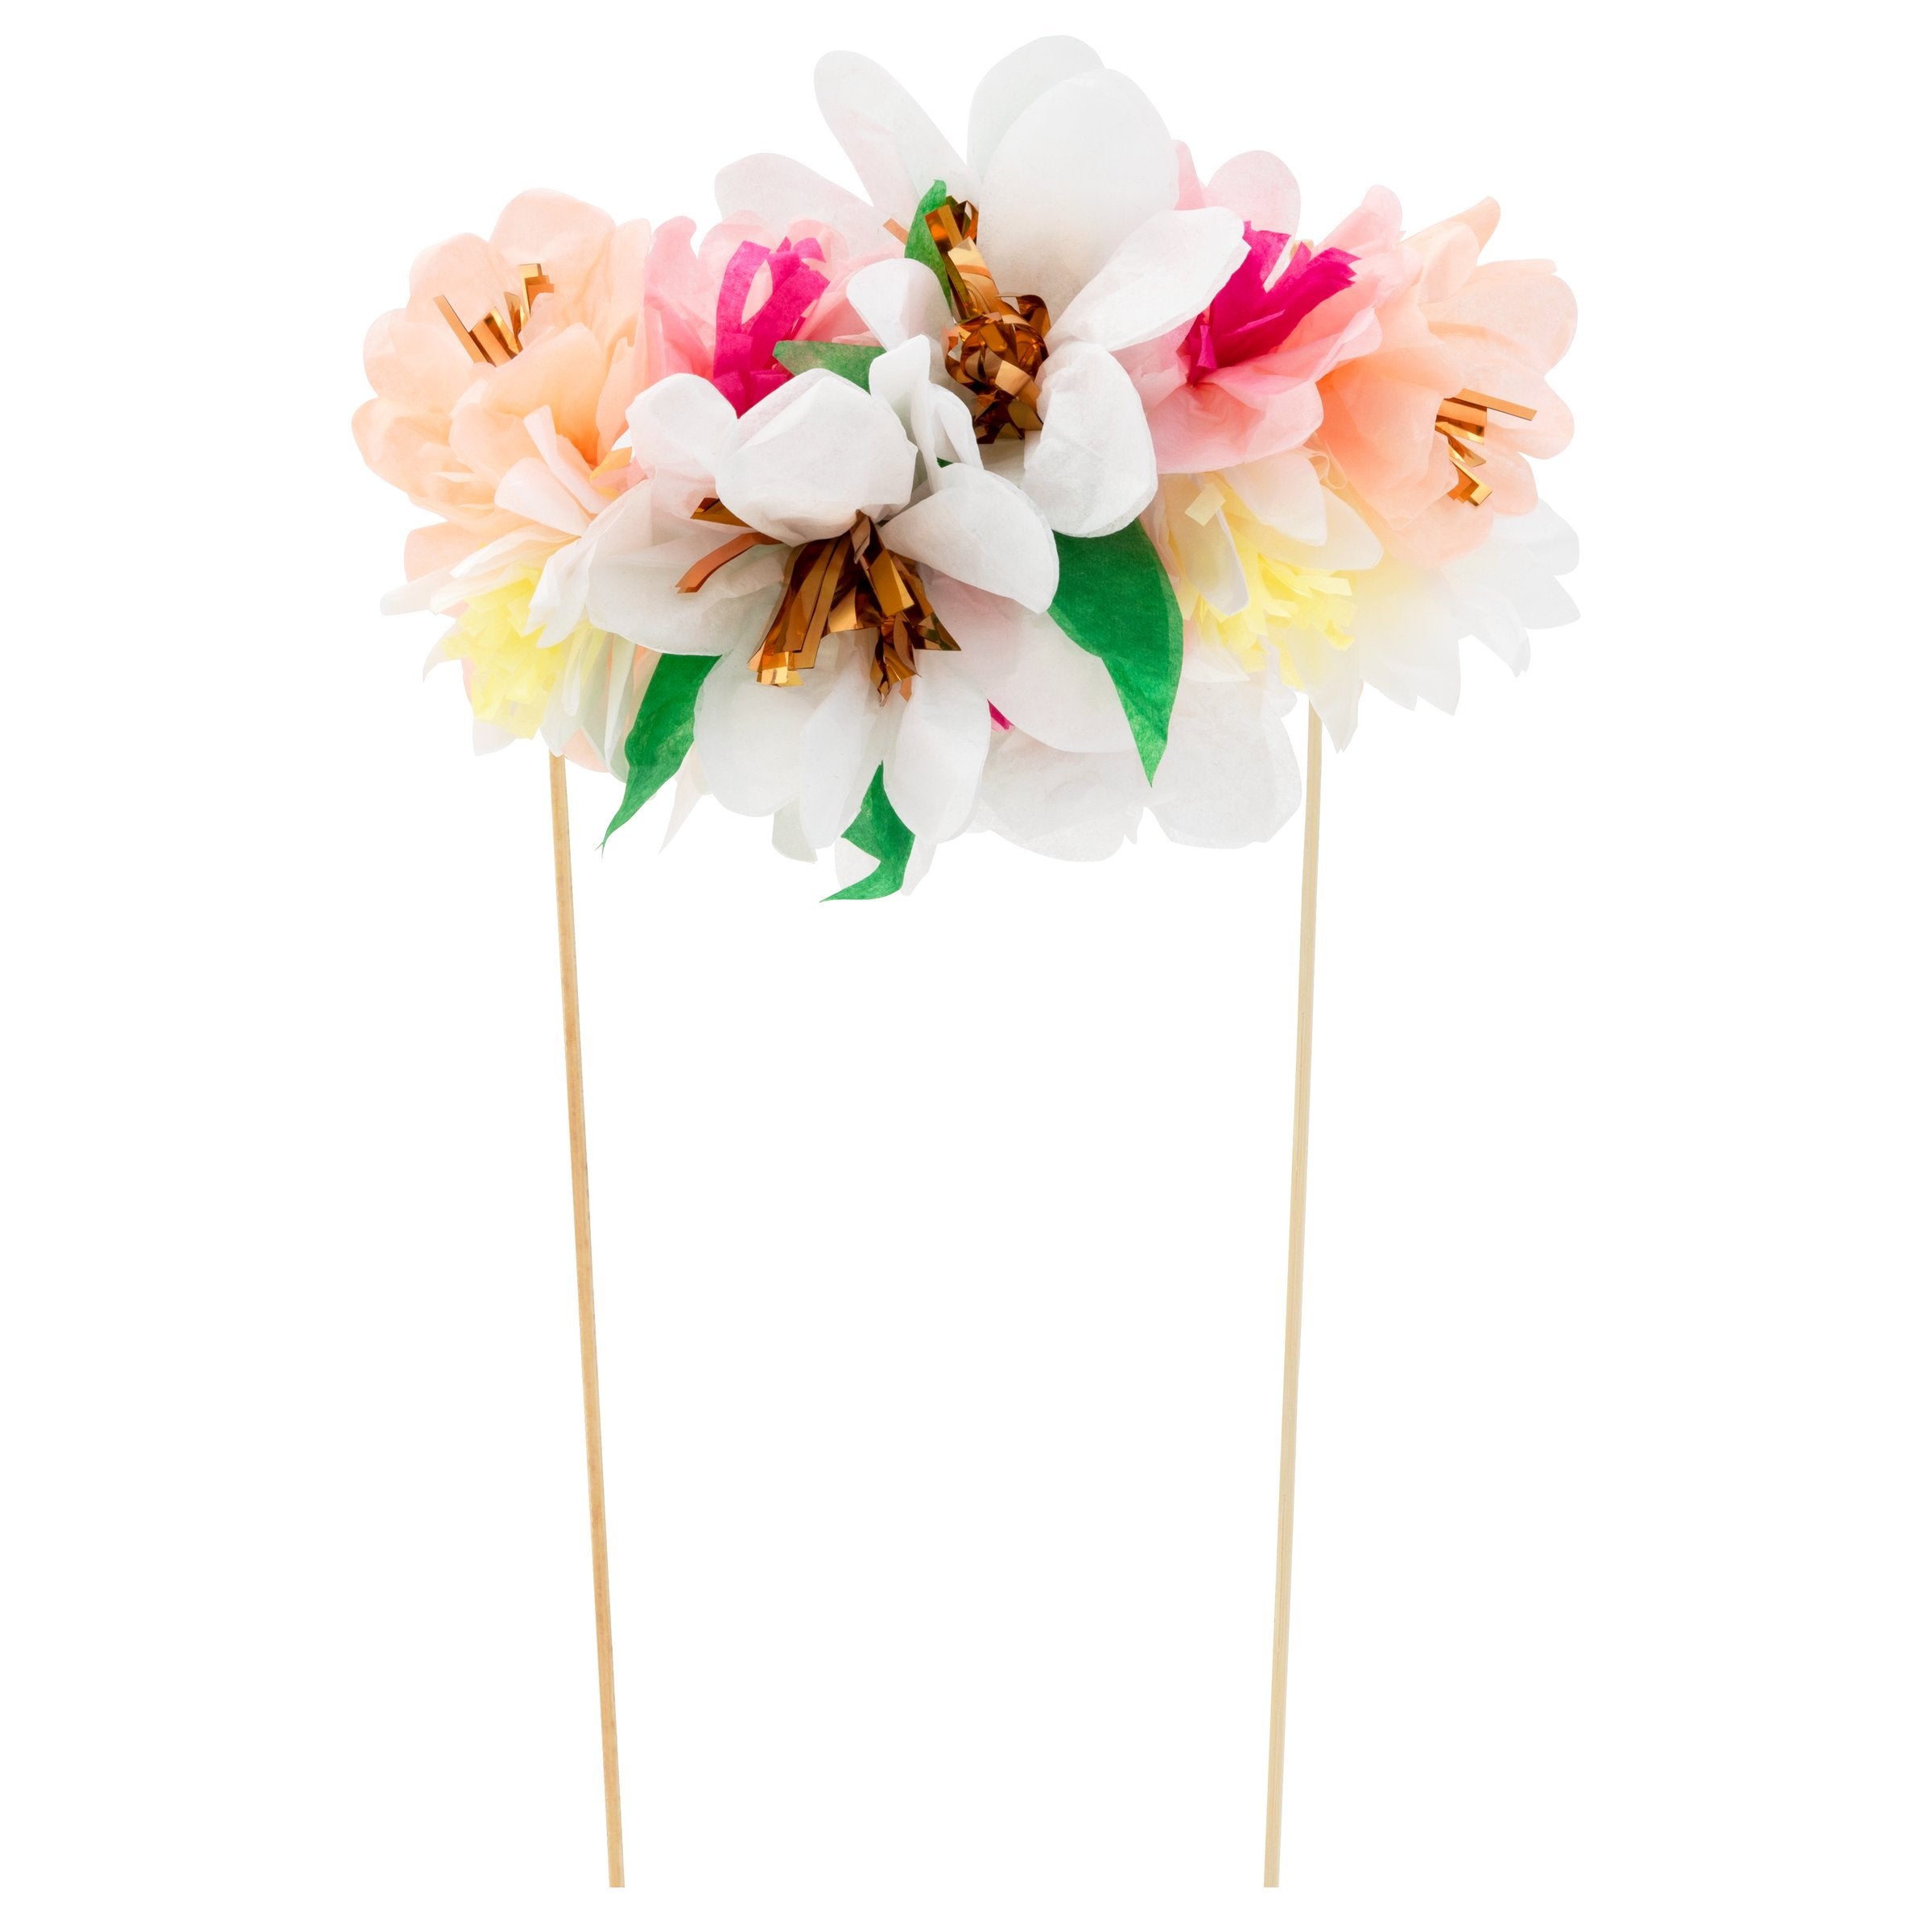 Turn a celebratory cake into a beautiful floral work of art with our fabulous cake topper crafted with colourful paper flowers.